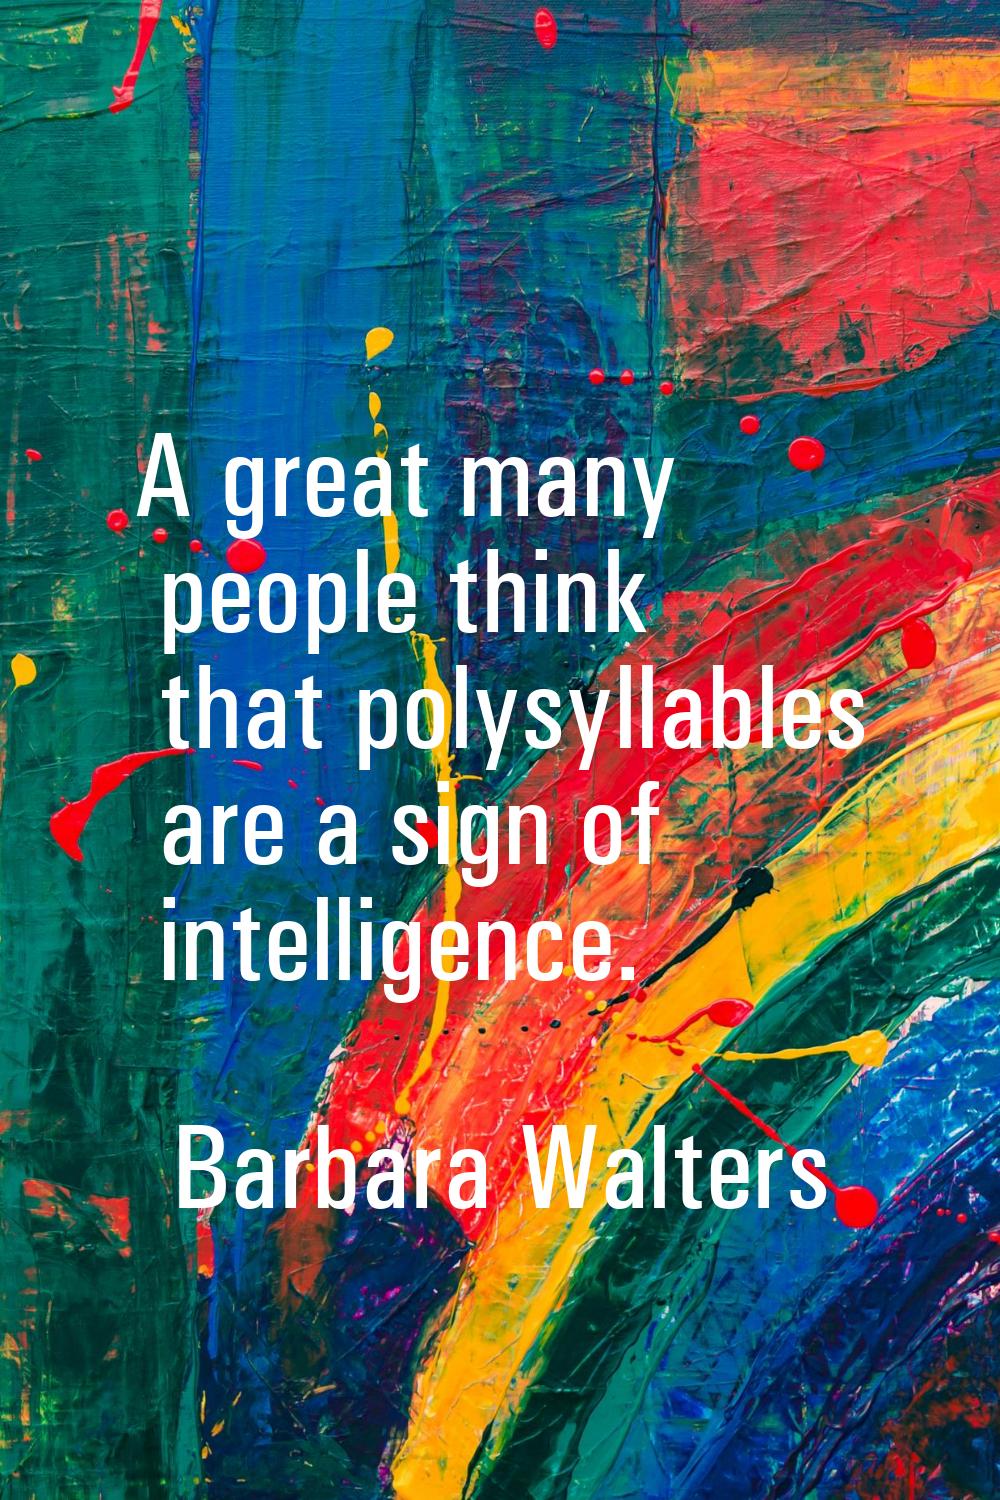 A great many people think that polysyllables are a sign of intelligence.